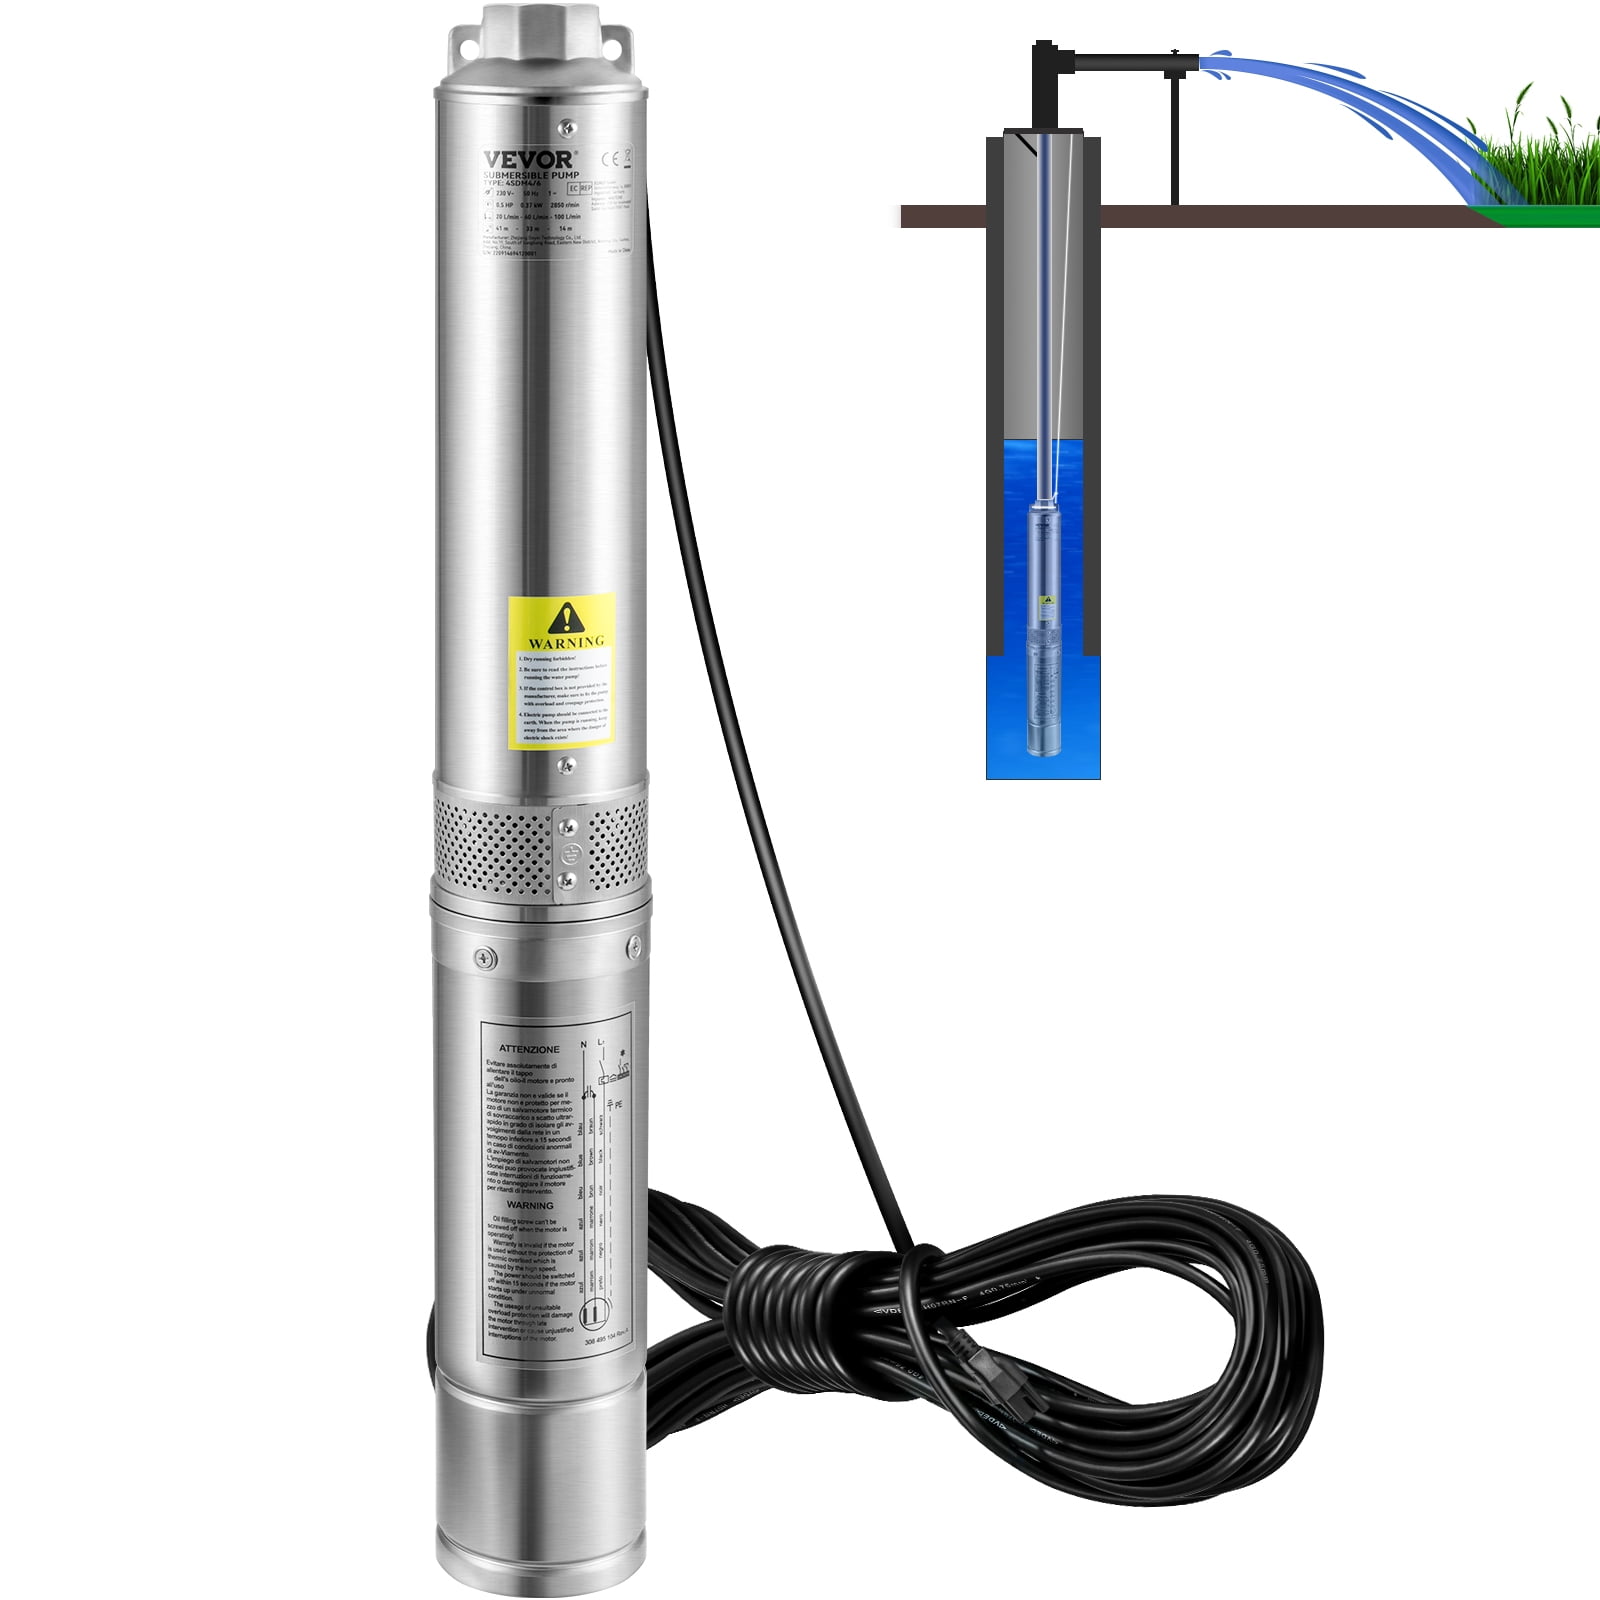 VEVOR Deep Well Submersible Pump, 3HP/2200W 230V/60Hz, 37GPM Flow 640 ft  Head, with 33 ft Electric Cord, inch Stainless Steel Water Pumps for  Industrial, Irrigation  Home Use, IP68 Waterproof Grade